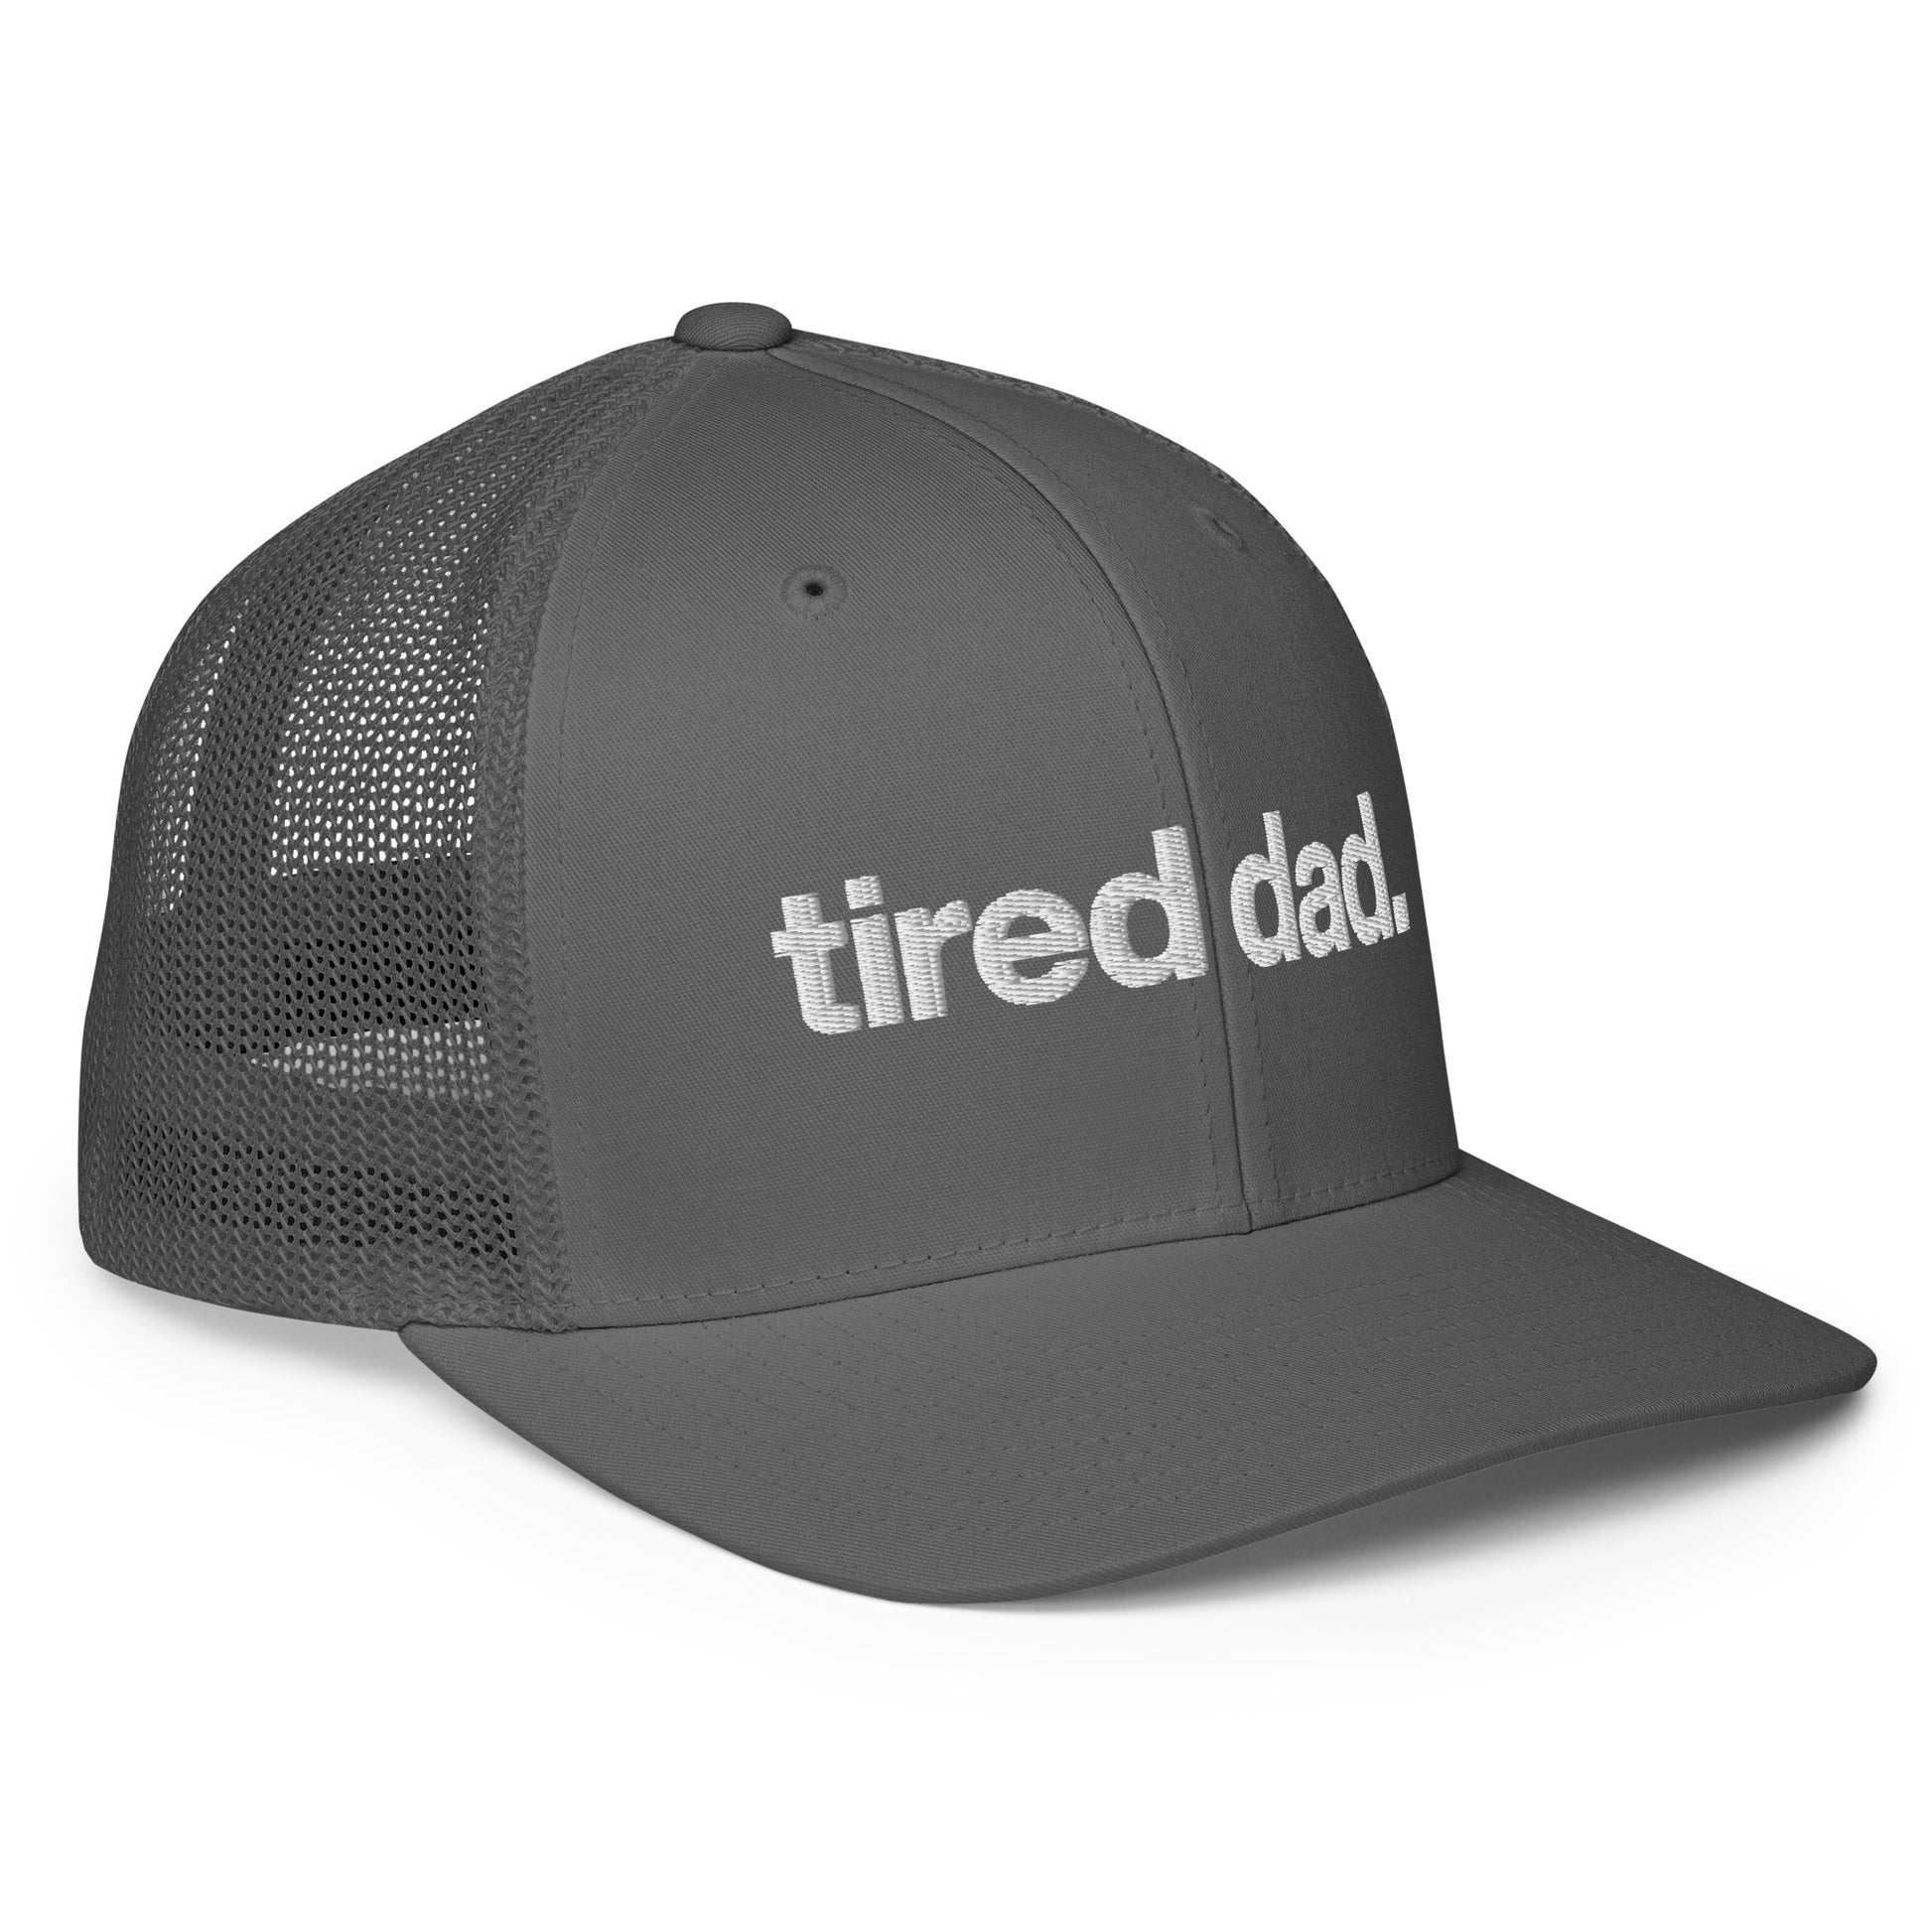 tired dad. flex-fit hat – Tired